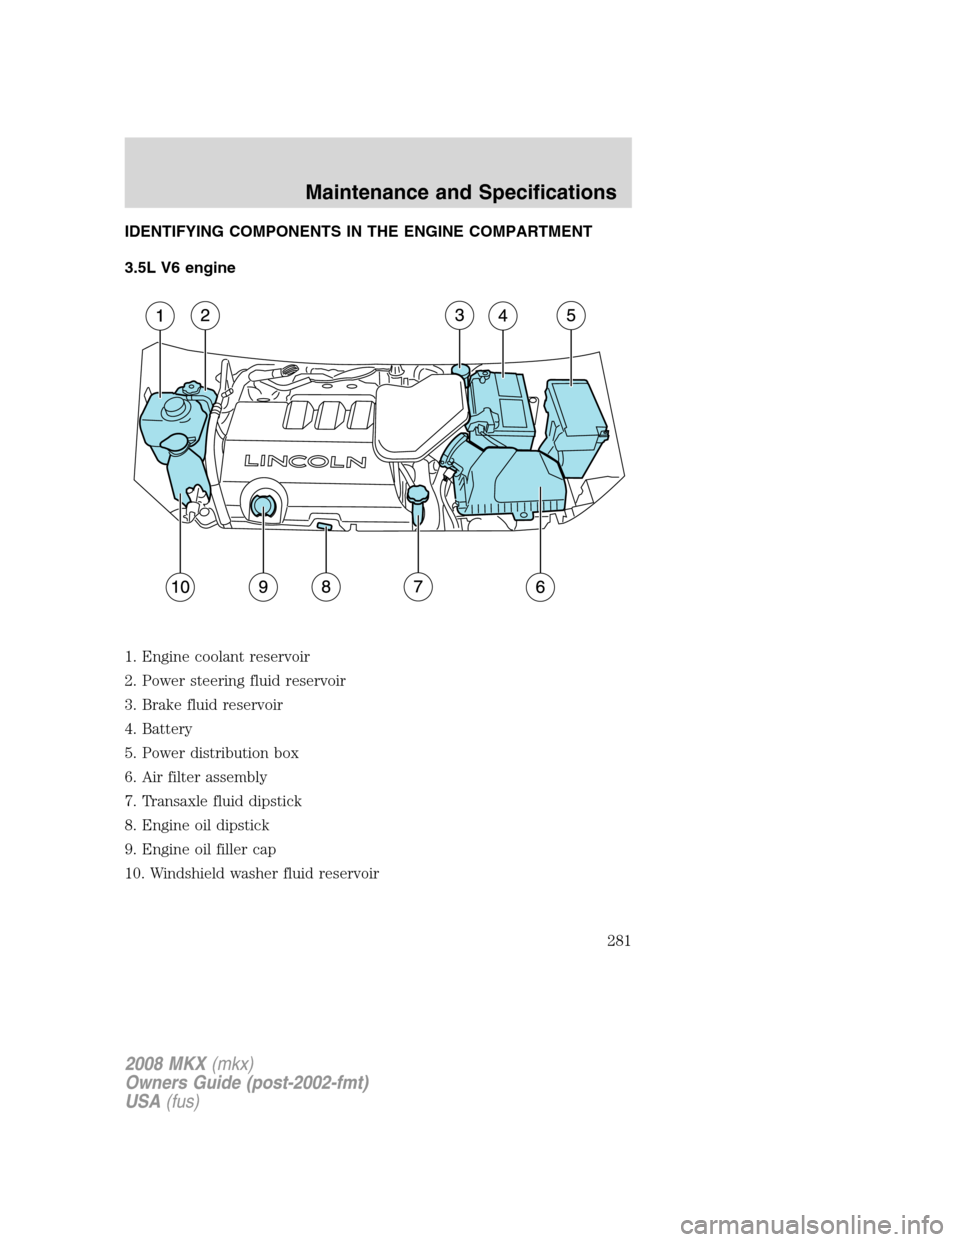 LINCOLN MKX 2008  Owners Manual IDENTIFYING COMPONENTS IN THE ENGINE COMPARTMENT
3.5L V6 engine
1. Engine coolant reservoir
2. Power steering fluid reservoir
3. Brake fluid reservoir
4. Battery
5. Power distribution box
6. Air filte